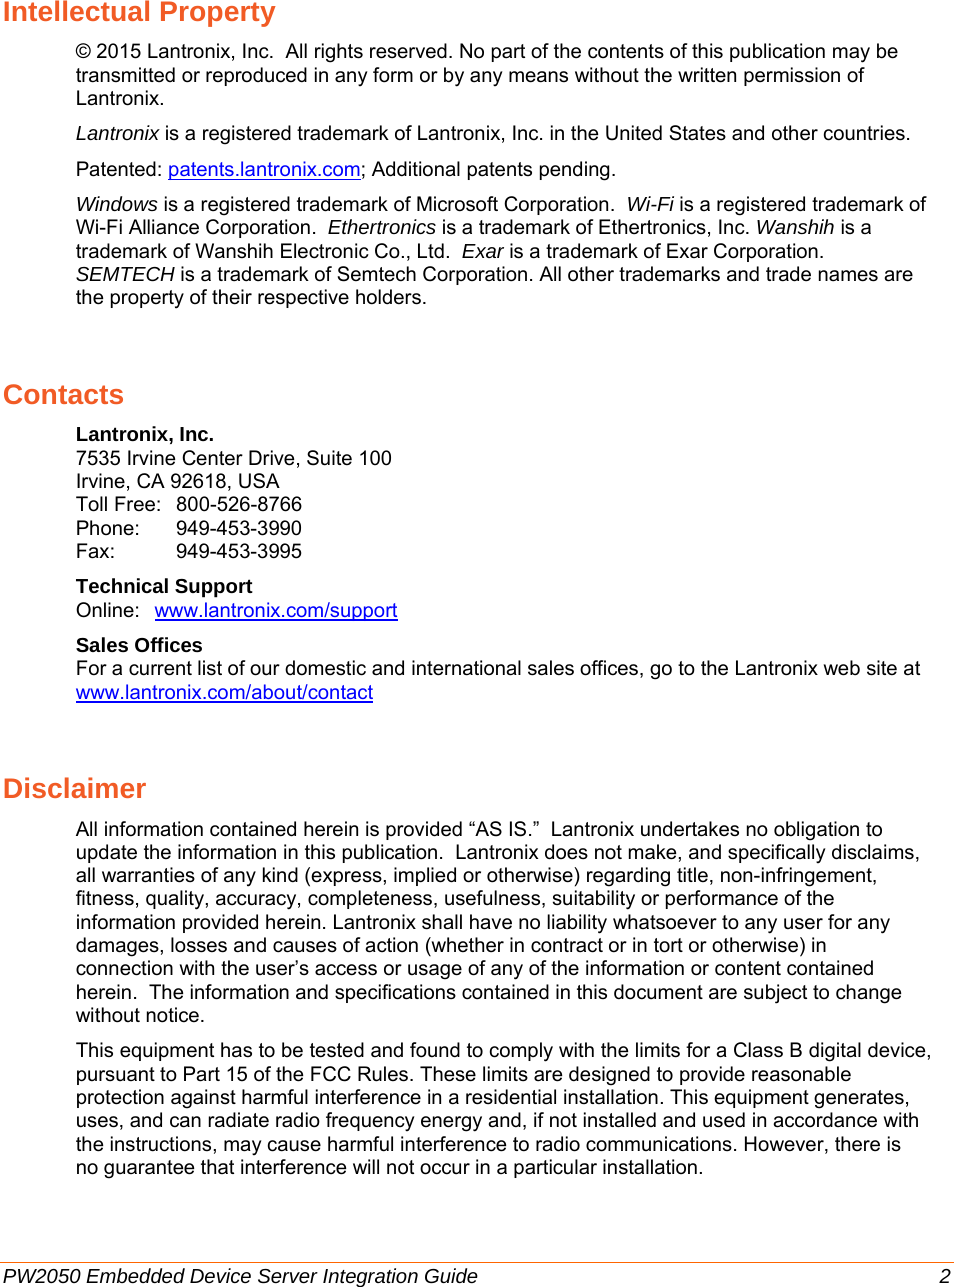     PW2050 Embedded Device Server Integration Guide  2 Intellectual Property © 2015 Lantronix, Inc.  All rights reserved. No part of the contents of this publication may be transmitted or reproduced in any form or by any means without the written permission of Lantronix.  Lantronix is a registered trademark of Lantronix, Inc. in the United States and other countries.   Patented: patents.lantronix.com; Additional patents pending. Windows is a registered trademark of Microsoft Corporation.  Wi-Fi is a registered trademark of Wi-Fi Alliance Corporation.  Ethertronics is a trademark of Ethertronics, Inc. Wanshih is a trademark of Wanshih Electronic Co., Ltd.  Exar is a trademark of Exar Corporation.  SEMTECH is a trademark of Semtech Corporation. All other trademarks and trade names are the property of their respective holders.  Contacts Lantronix, Inc. 7535 Irvine Center Drive, Suite 100 Irvine, CA 92618, USA Toll Free:  800-526-8766 Phone:   949-453-3990 Fax:   949-453-3995 Technical Support Online:  www.lantronix.com/support Sales Offices For a current list of our domestic and international sales offices, go to the Lantronix web site at www.lantronix.com/about/contact Disclaimer All information contained herein is provided “AS IS.”  Lantronix undertakes no obligation to update the information in this publication.  Lantronix does not make, and specifically disclaims, all warranties of any kind (express, implied or otherwise) regarding title, non-infringement, fitness, quality, accuracy, completeness, usefulness, suitability or performance of the information provided herein. Lantronix shall have no liability whatsoever to any user for any damages, losses and causes of action (whether in contract or in tort or otherwise) in connection with the user’s access or usage of any of the information or content contained herein.  The information and specifications contained in this document are subject to change without notice. This equipment has to be tested and found to comply with the limits for a Class B digital device, pursuant to Part 15 of the FCC Rules. These limits are designed to provide reasonable protection against harmful interference in a residential installation. This equipment generates, uses, and can radiate radio frequency energy and, if not installed and used in accordance with the instructions, may cause harmful interference to radio communications. However, there is no guarantee that interference will not occur in a particular installation.   